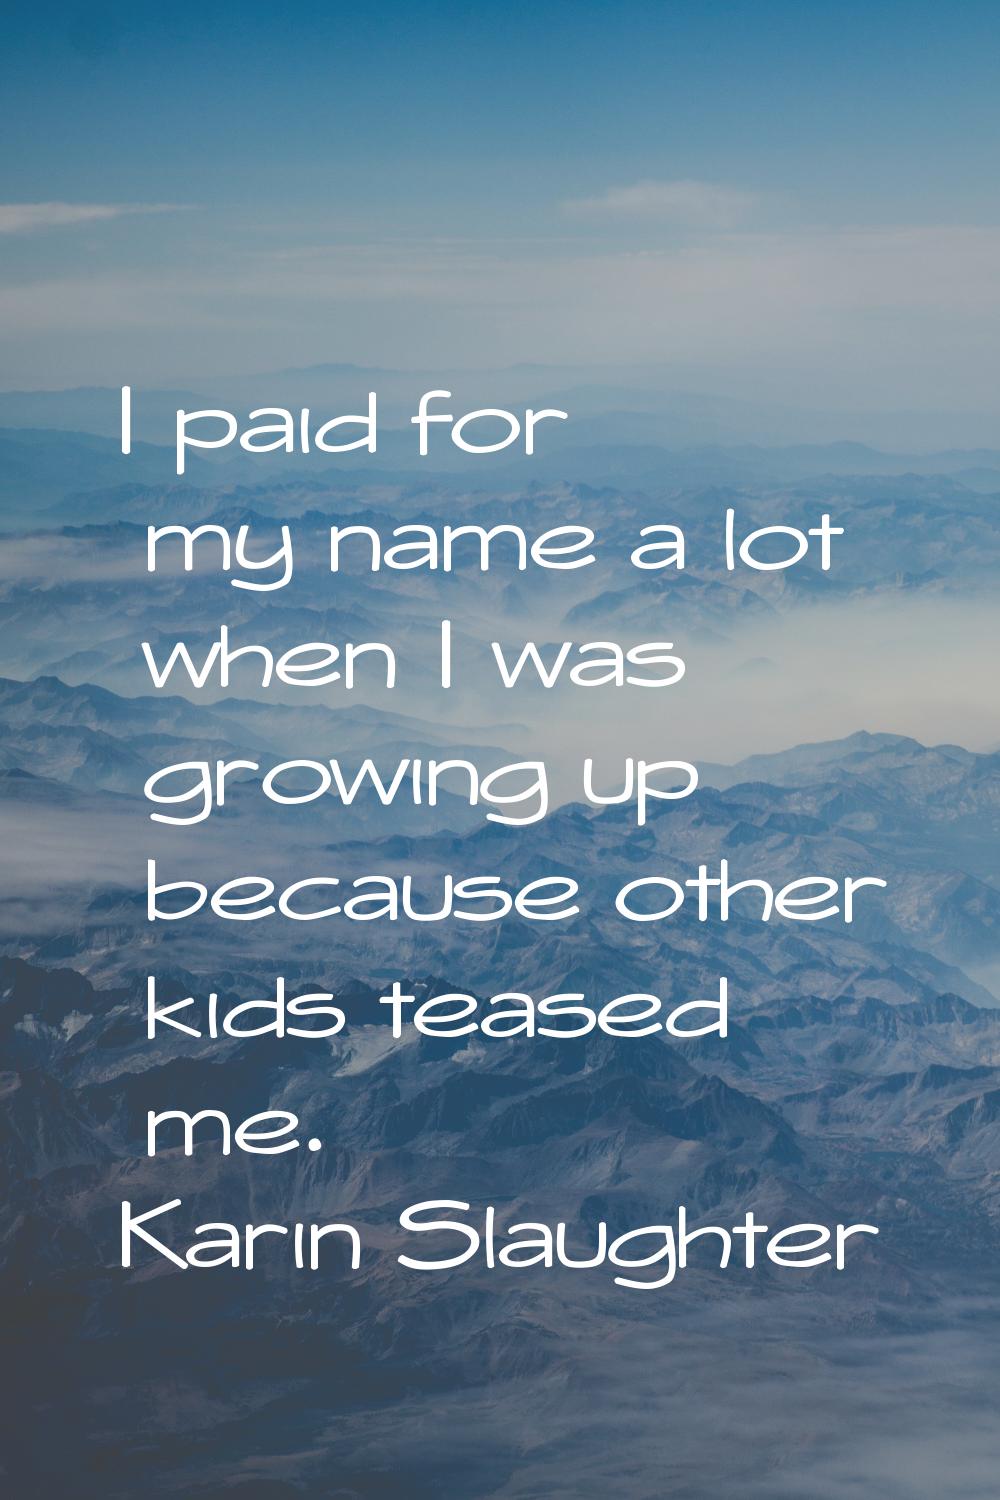 I paid for my name a lot when I was growing up because other kids teased me.